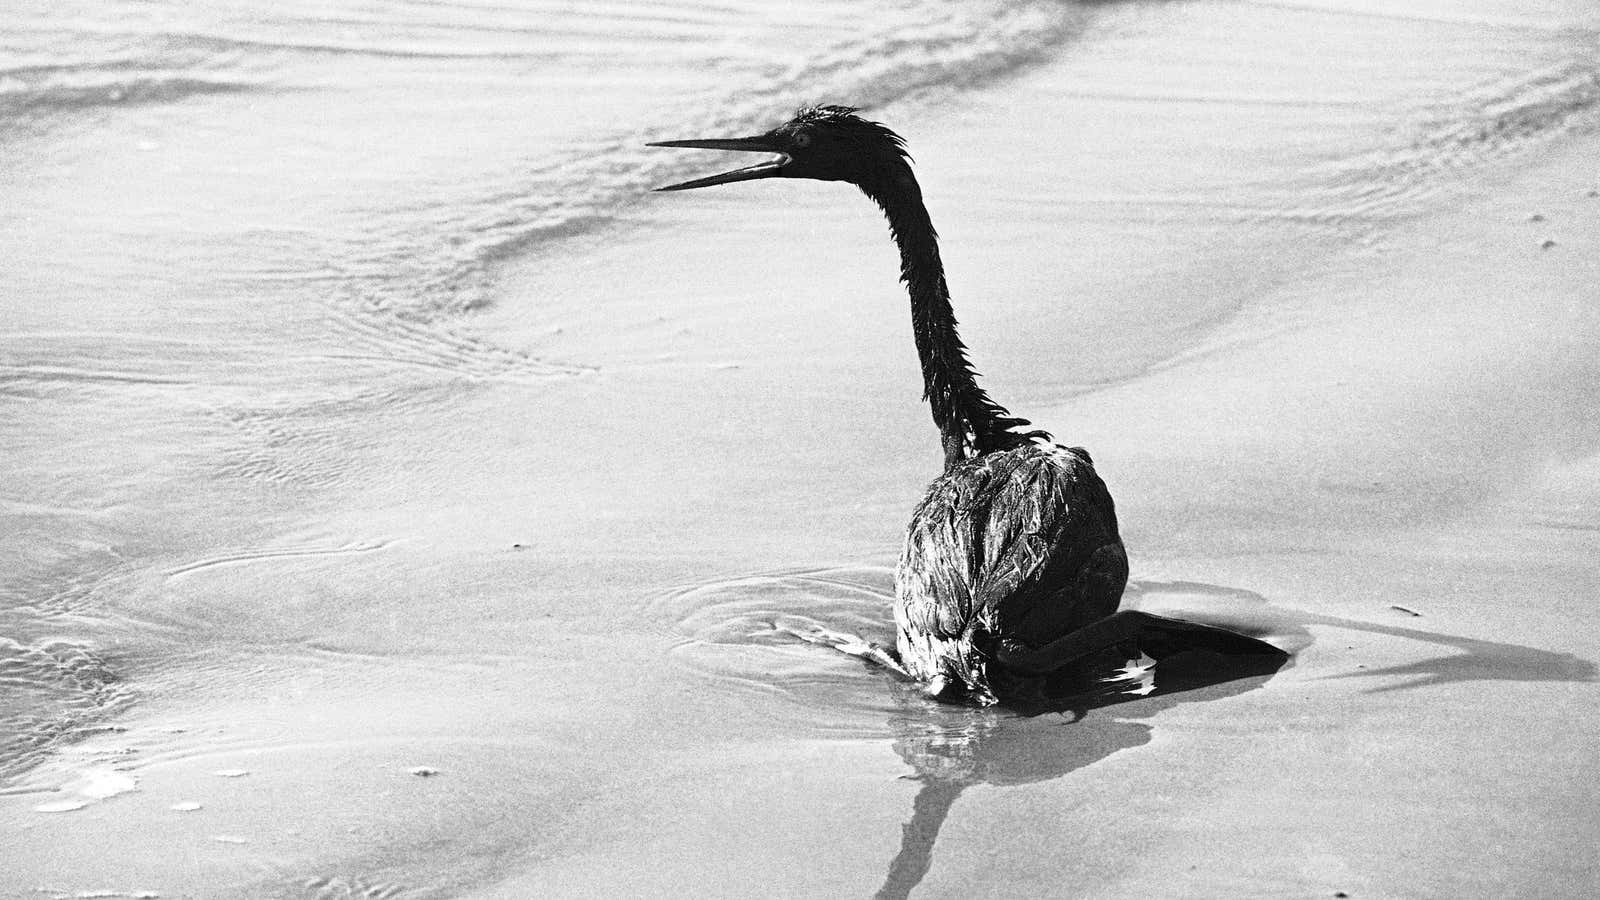 A 1969 oil spill led to the first Earth Day in 1970.